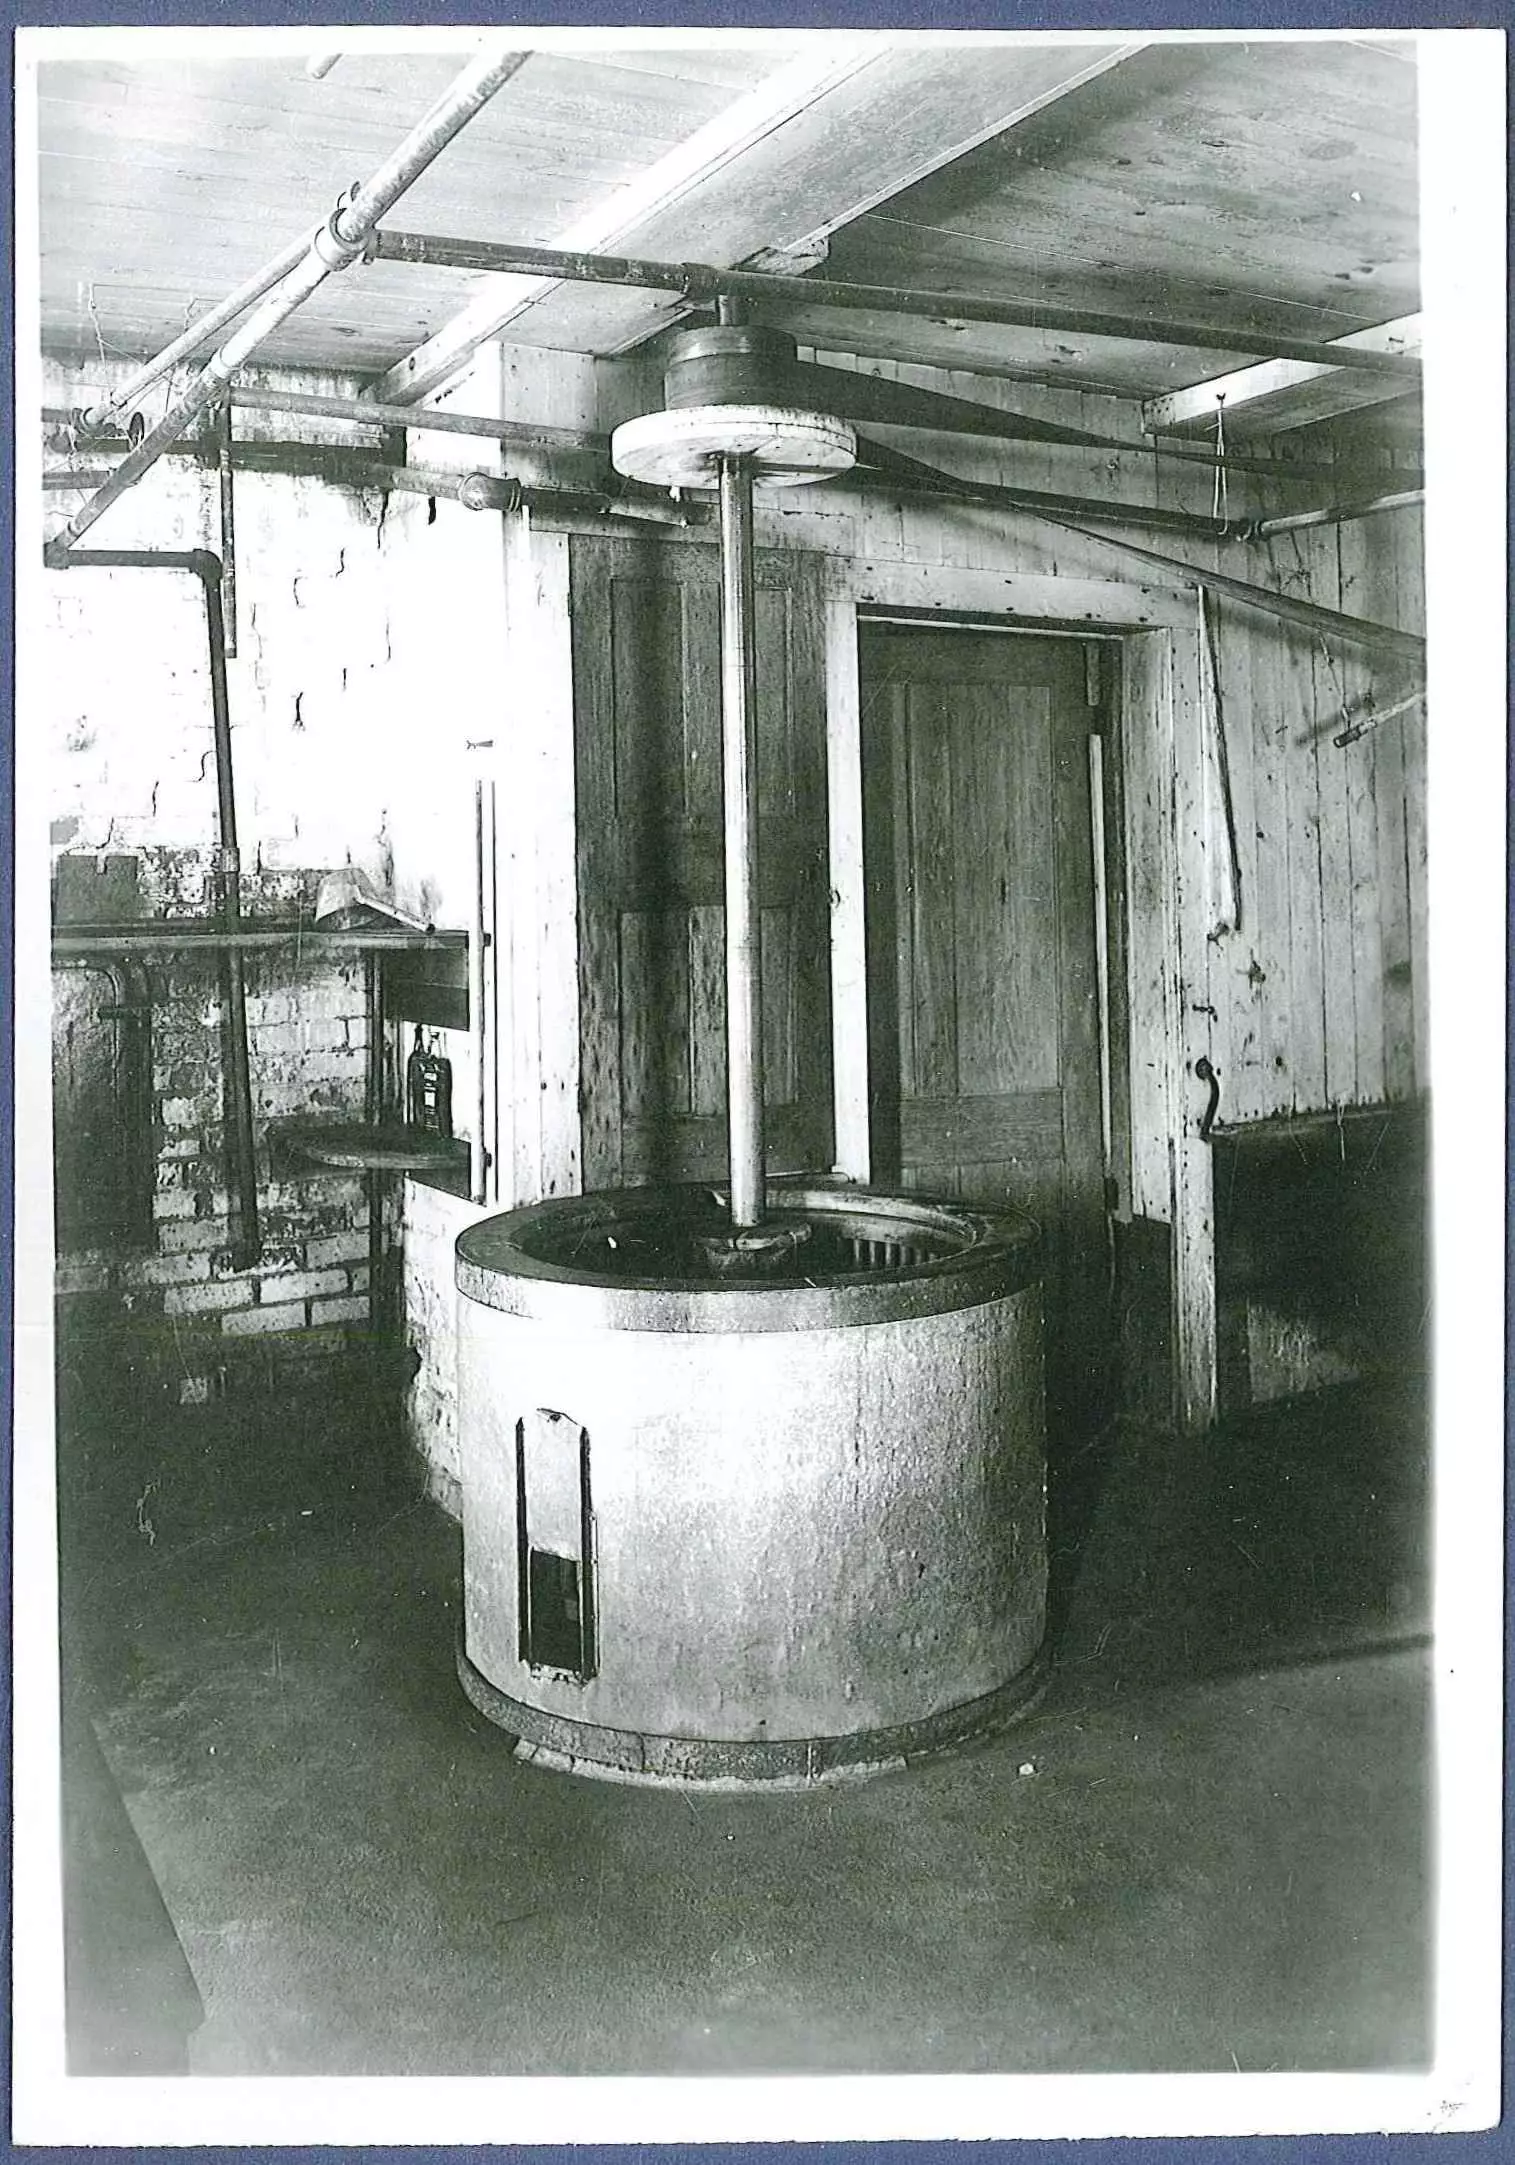 An old black and white photo of a machine in a room.